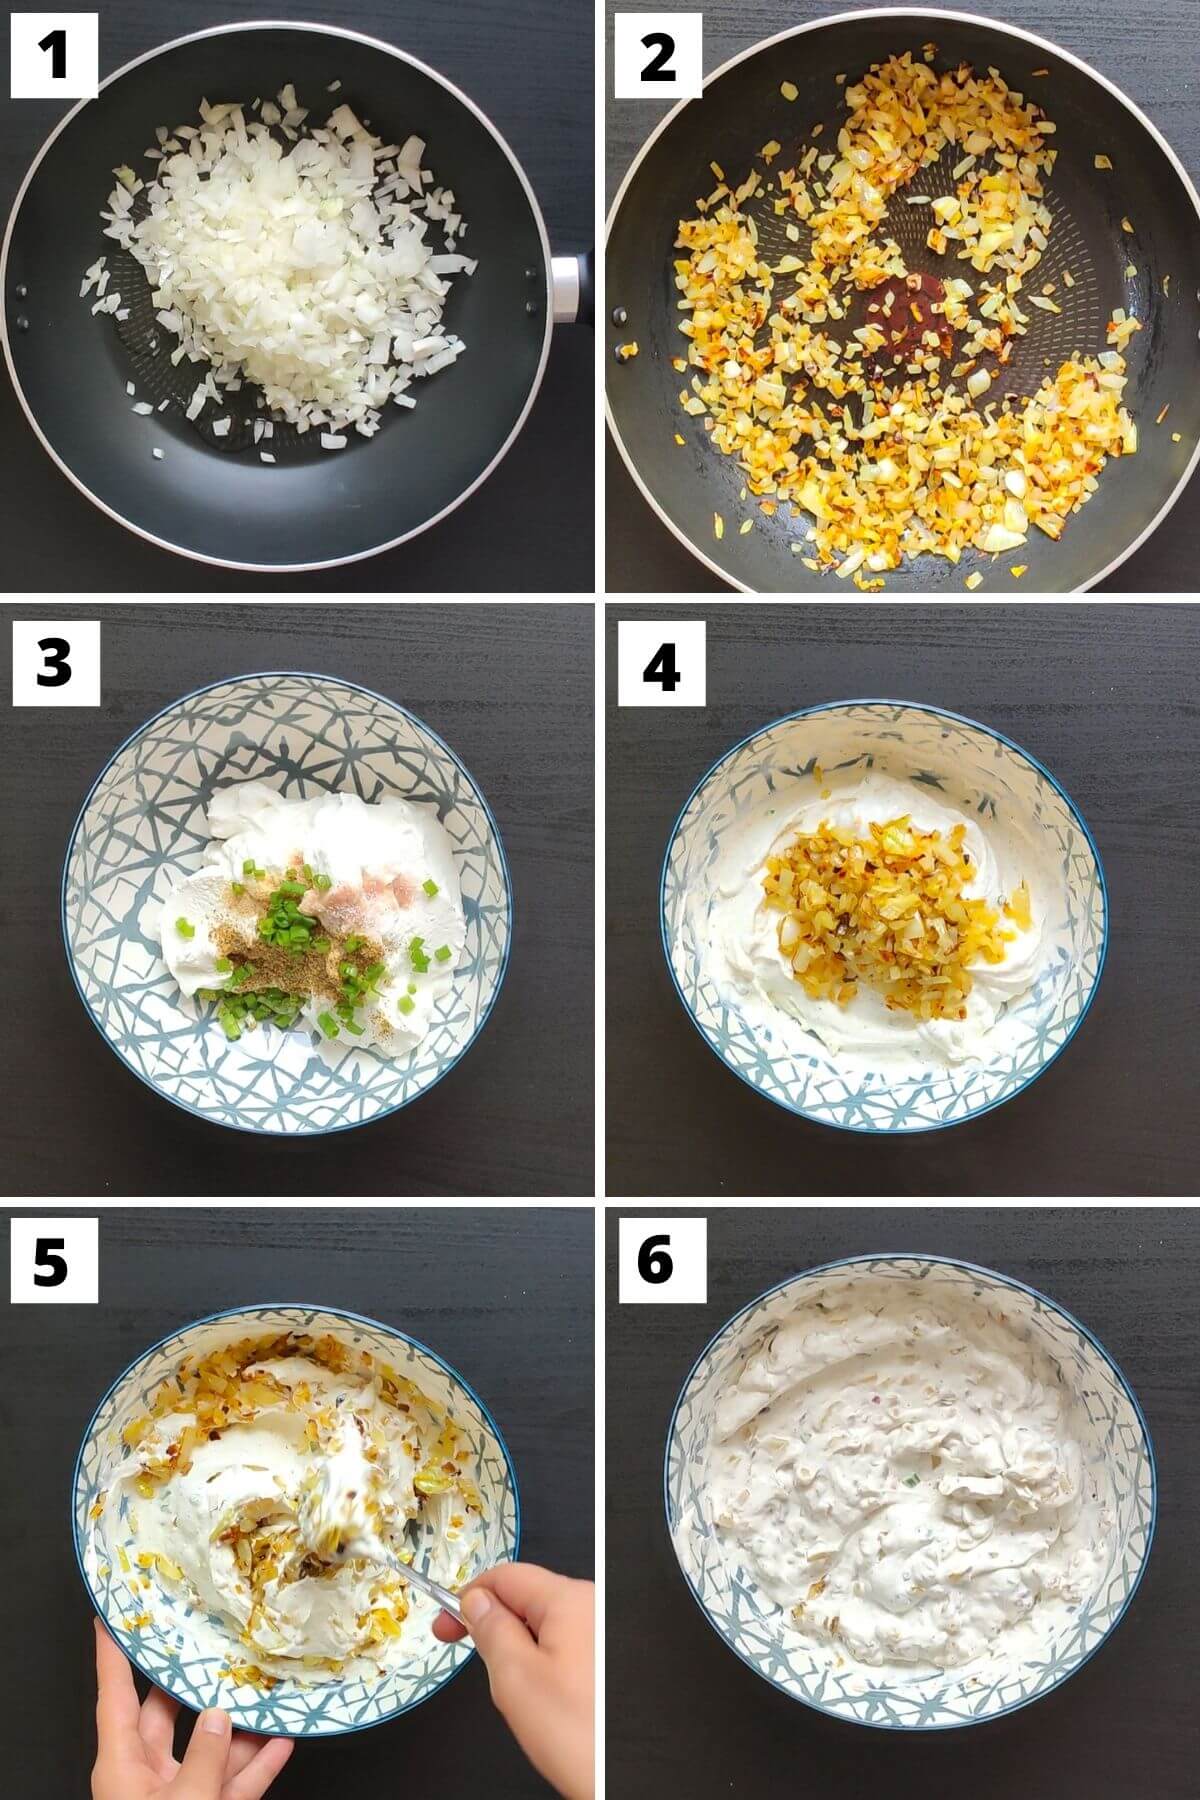 Steps to make sour cream and onion dip